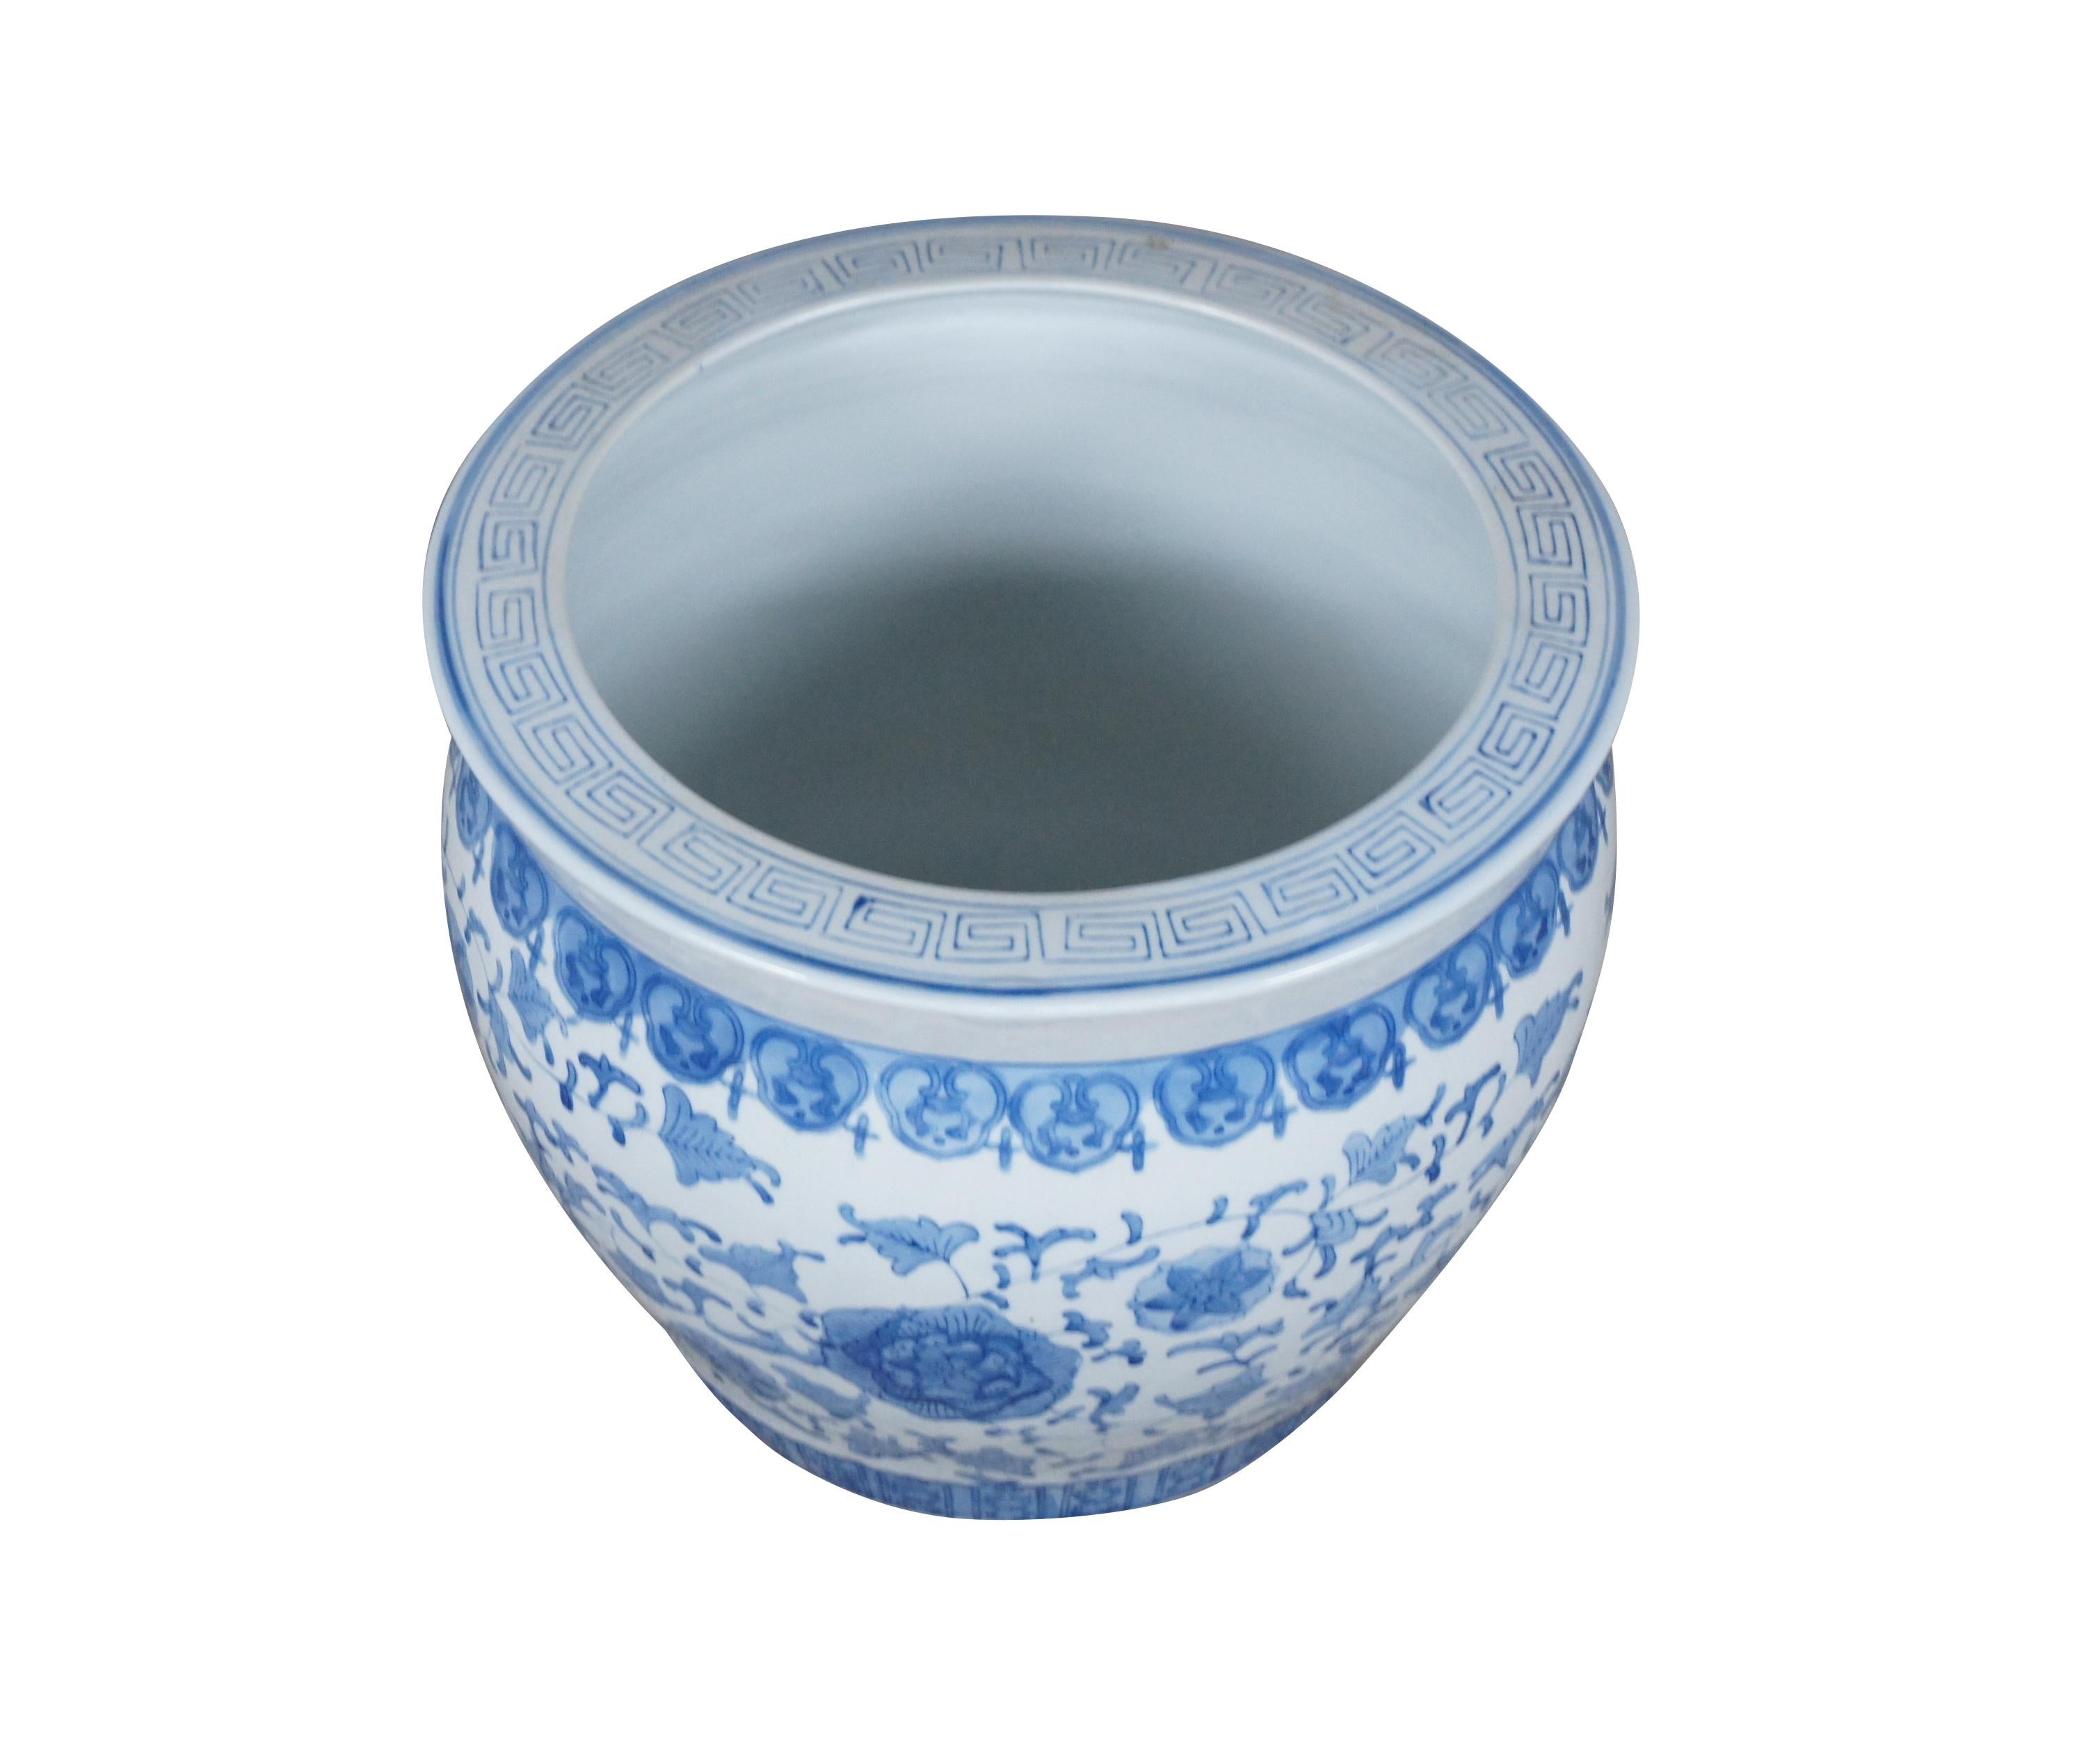 Vintage Fish Bowl Ceramic Planter featuring Hand Painted Chinoiserie Style Floral Motifs and Trim in Blue on a White Background. Measure: 17